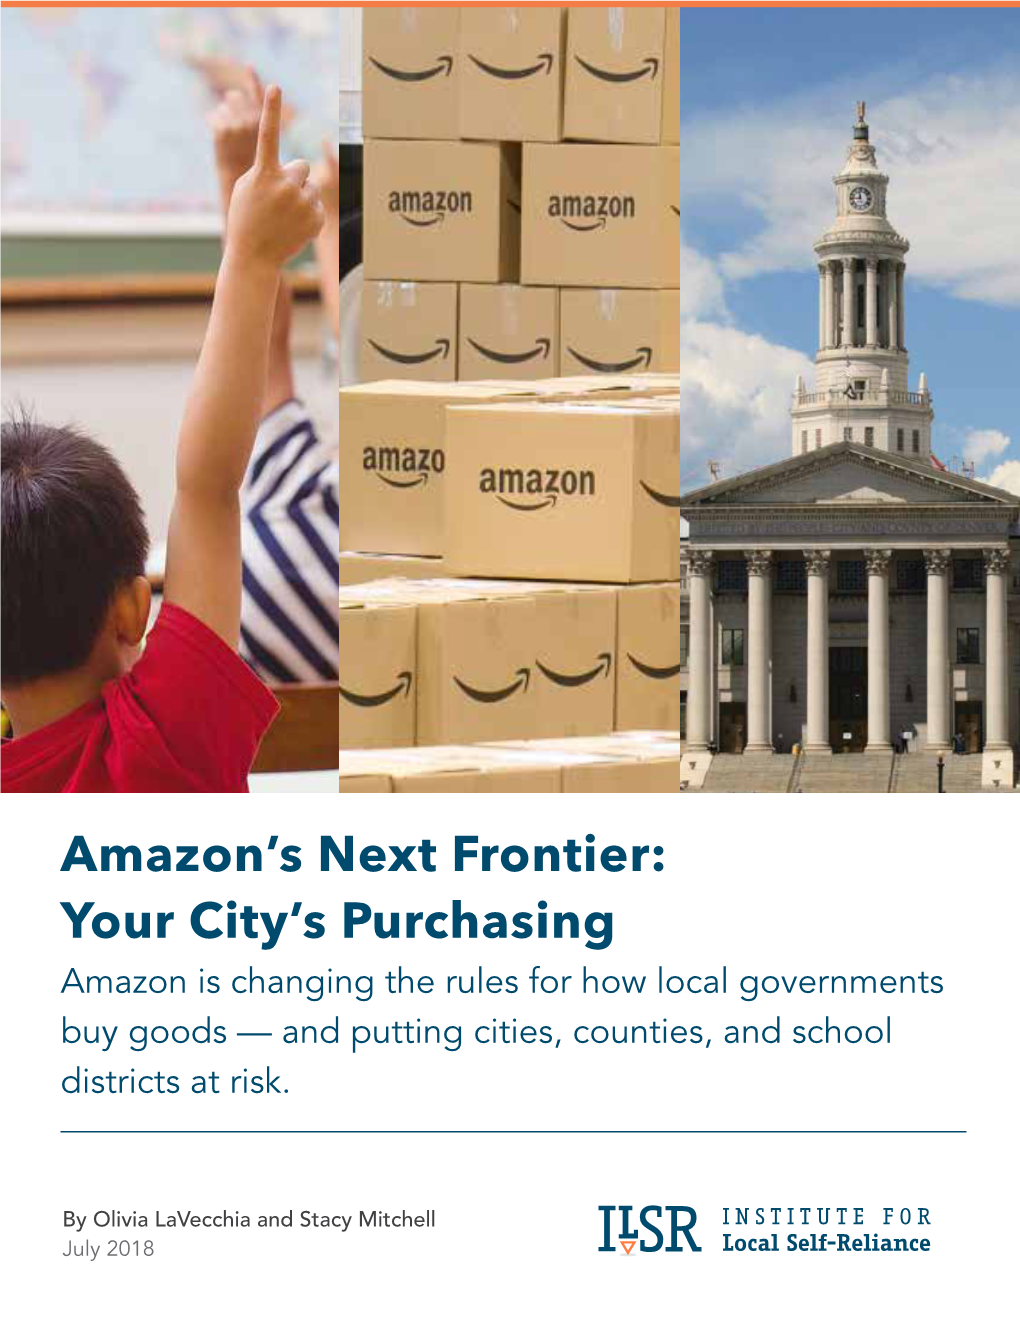 Amazon's Next Frontier: Your City's Purchasing